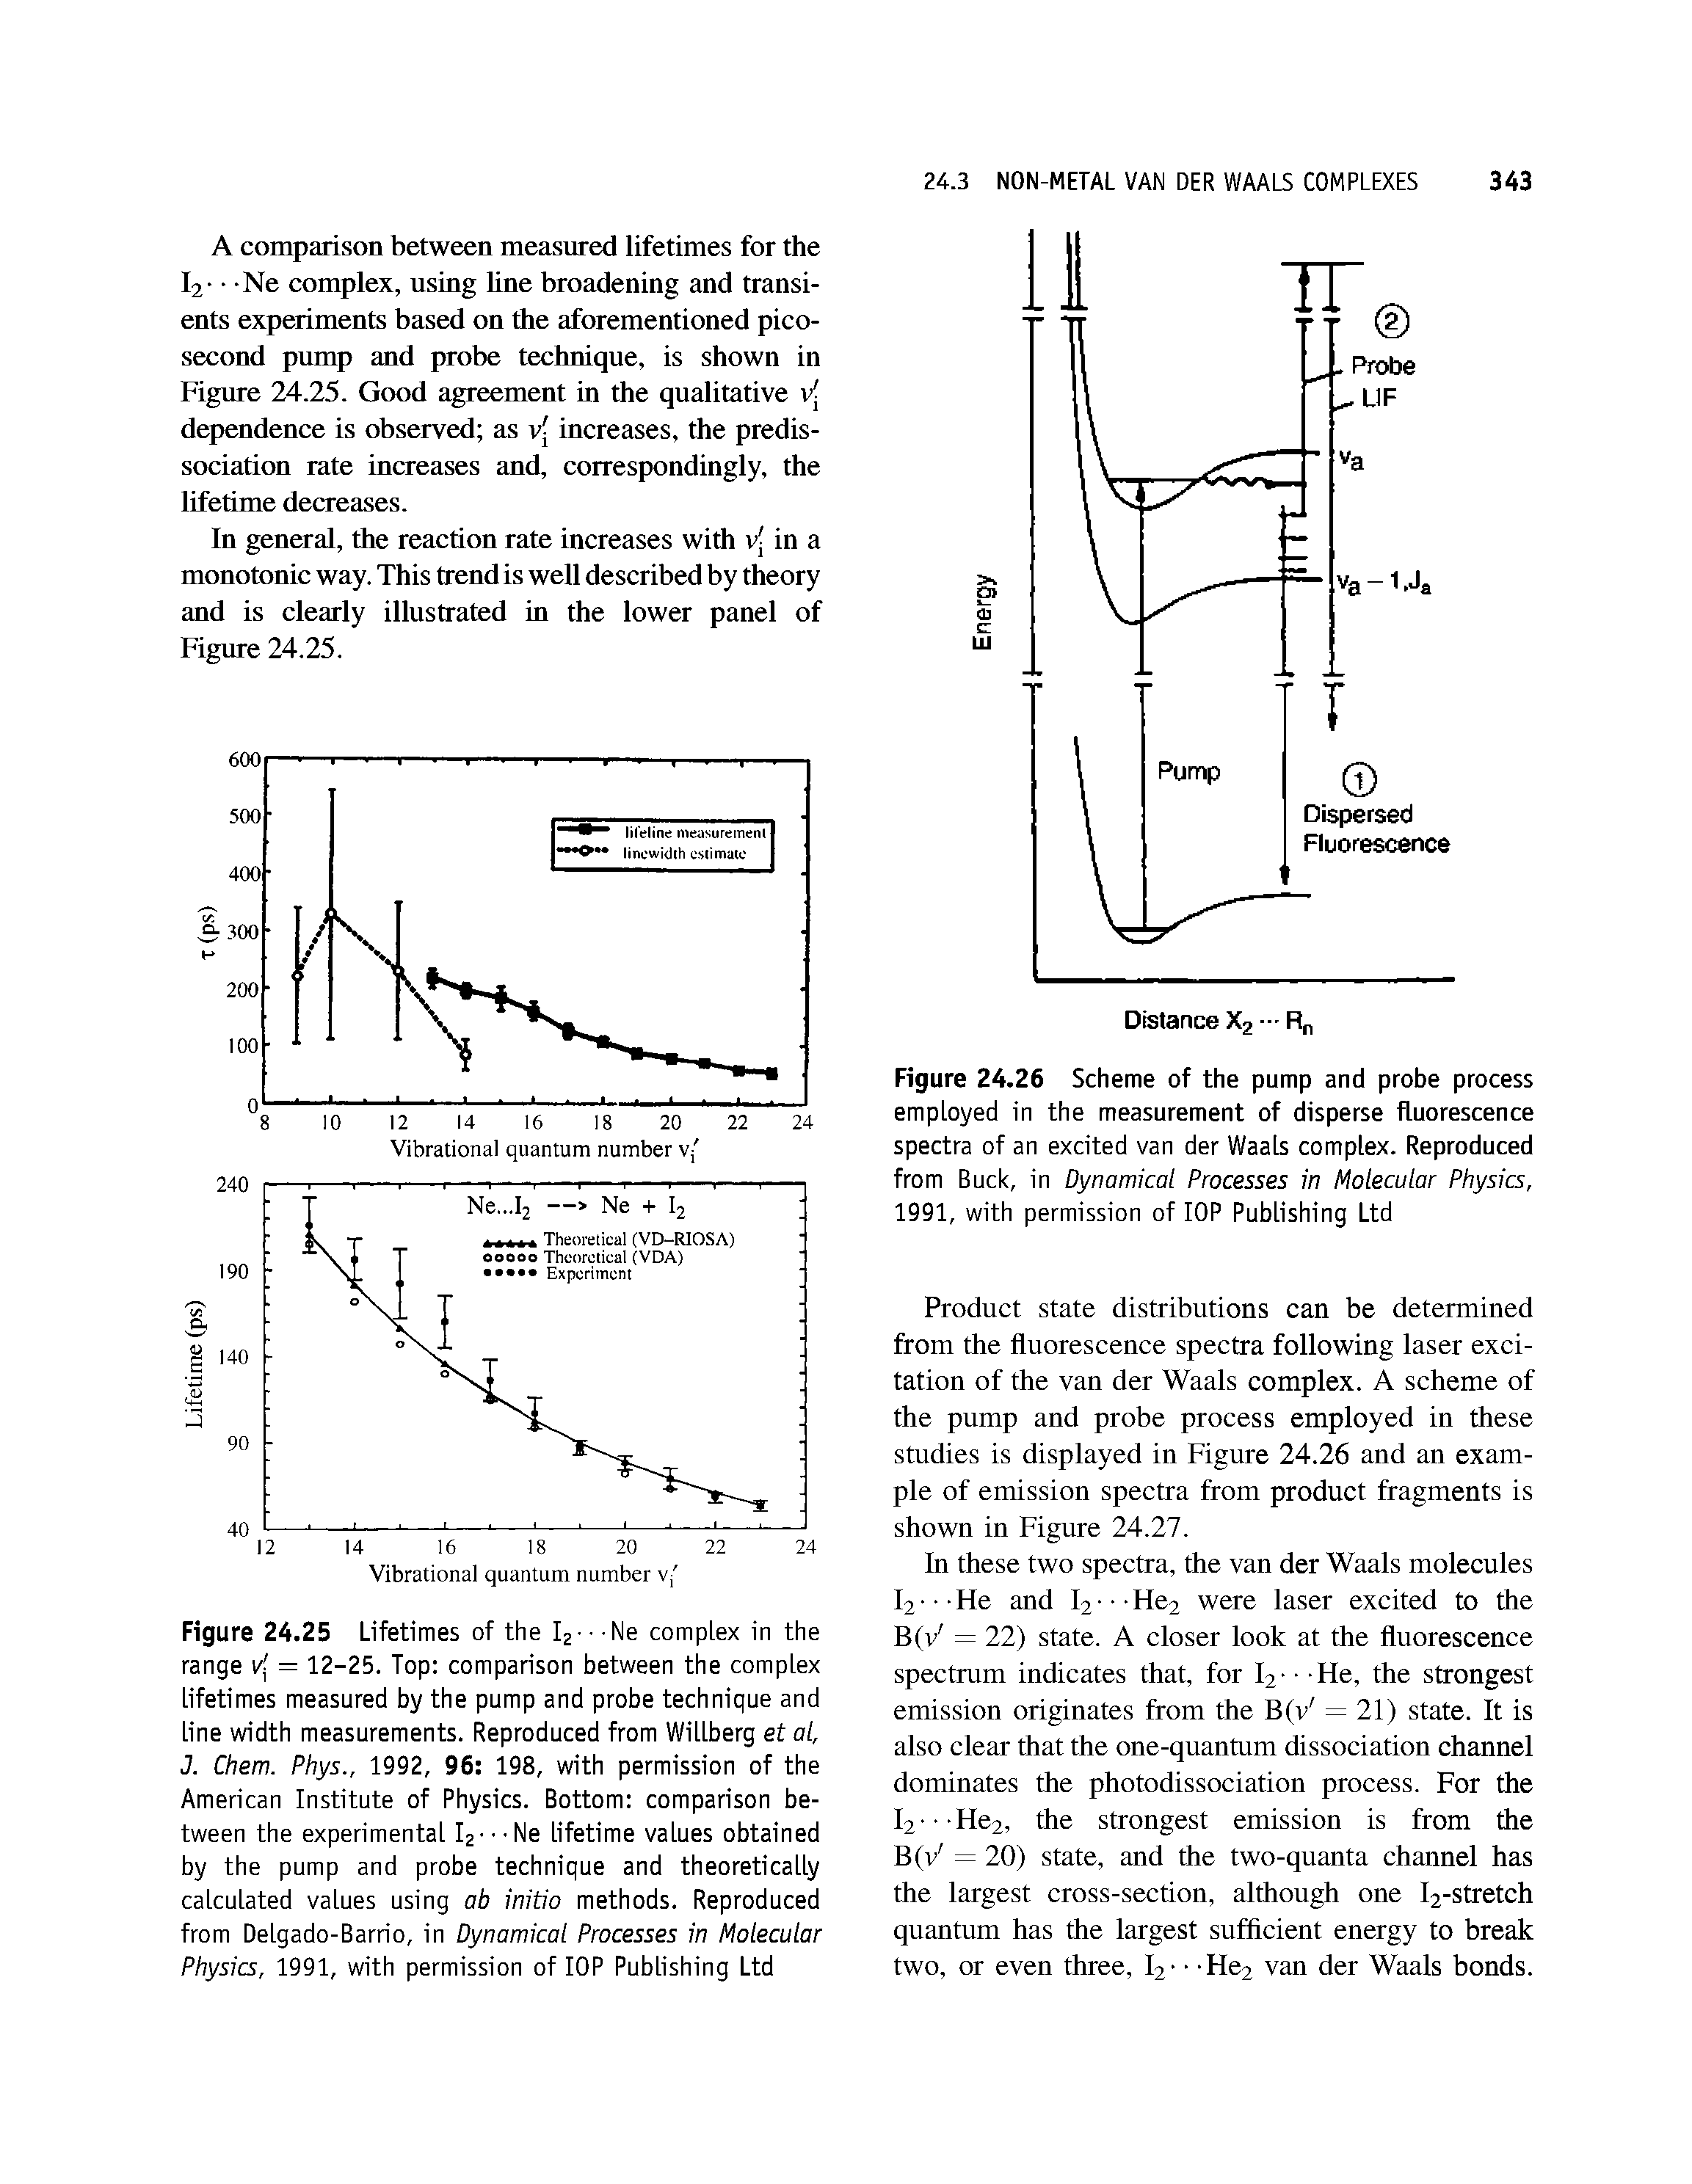 Figure 24.25 Lifetimes of the I2---Ne complex in the range v = 12-25. Top comparison between the complex lifetimes measured by the pump and probe technique and line width measurements. Reproduced from Willberg et al, J. Chem. Phys., 1992, 96 198, with permission of the American Institute of Physics. Bottom comparison between the experimental l2 - Ne lifetime values obtained by the pump and probe technique and theoretically calculated values using ab initio methods. Reproduced from Delgado-Barrio, in Dynamicai Processes in Molecular Physics, 1991, with permission of lOP Publishing Ltd...